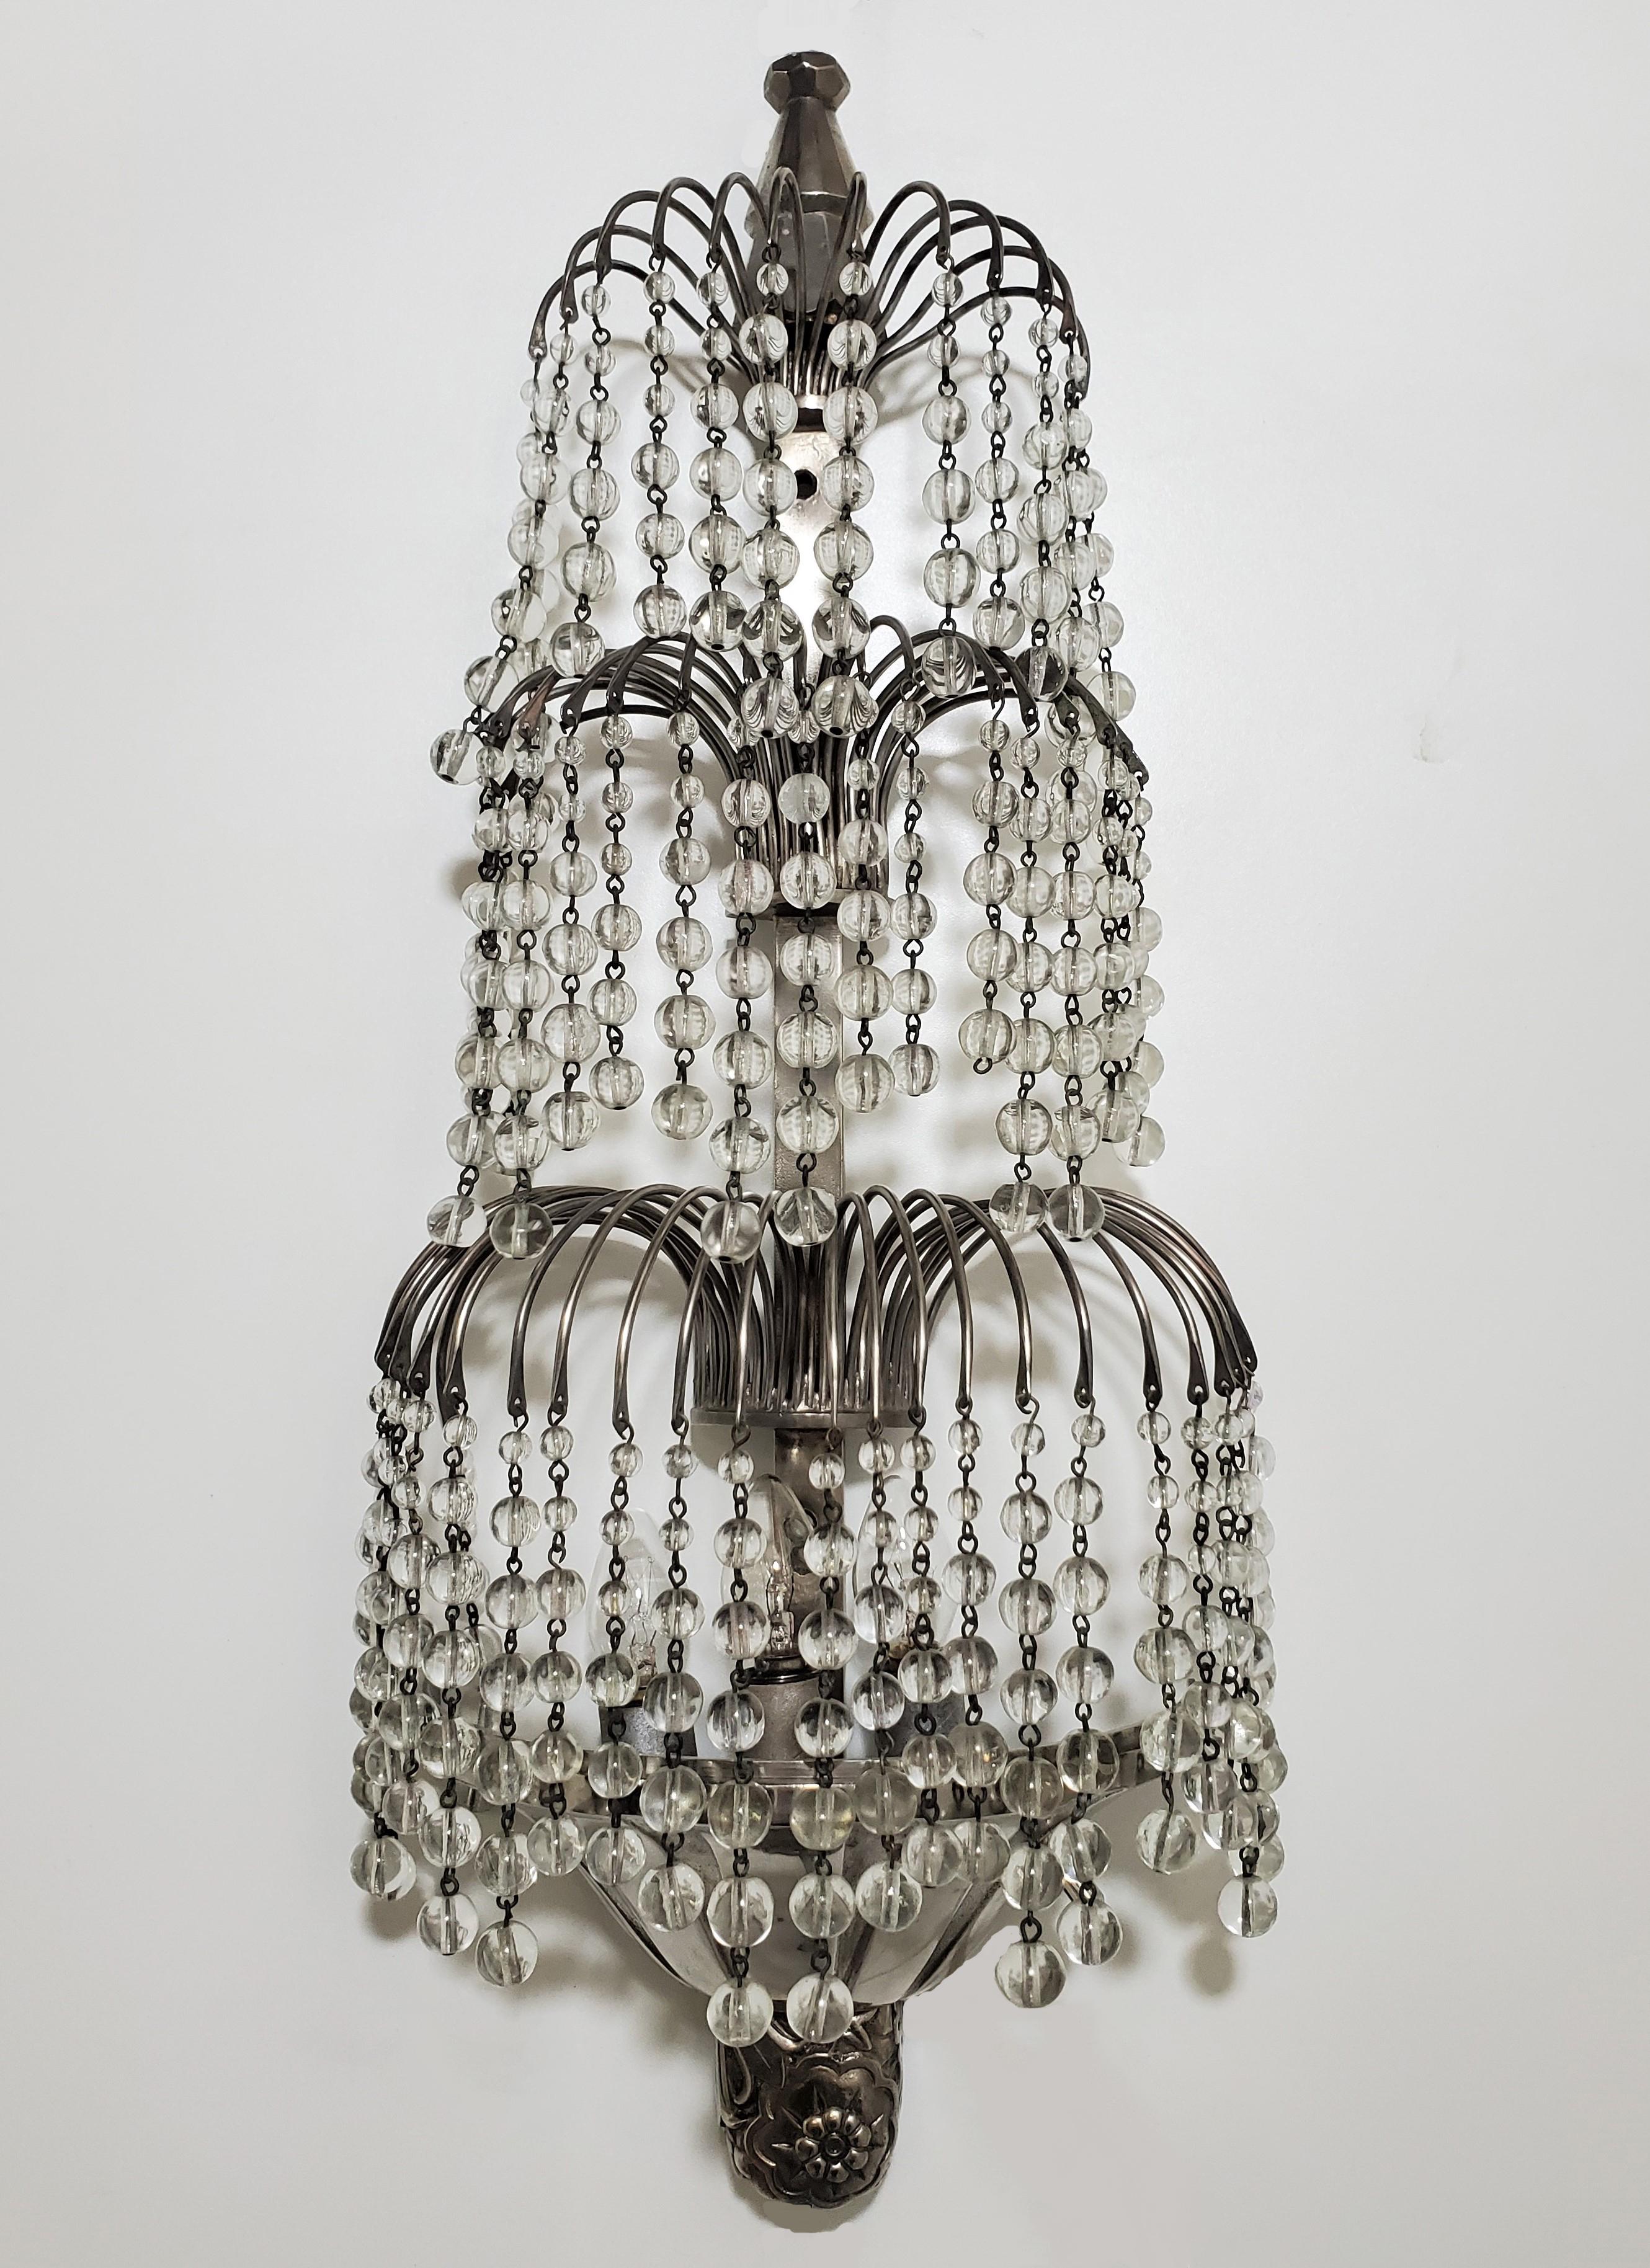 Pair of Tiered Crystal French Art Deco Wall Sconces Attrib to Sue et Mare For Sale 6